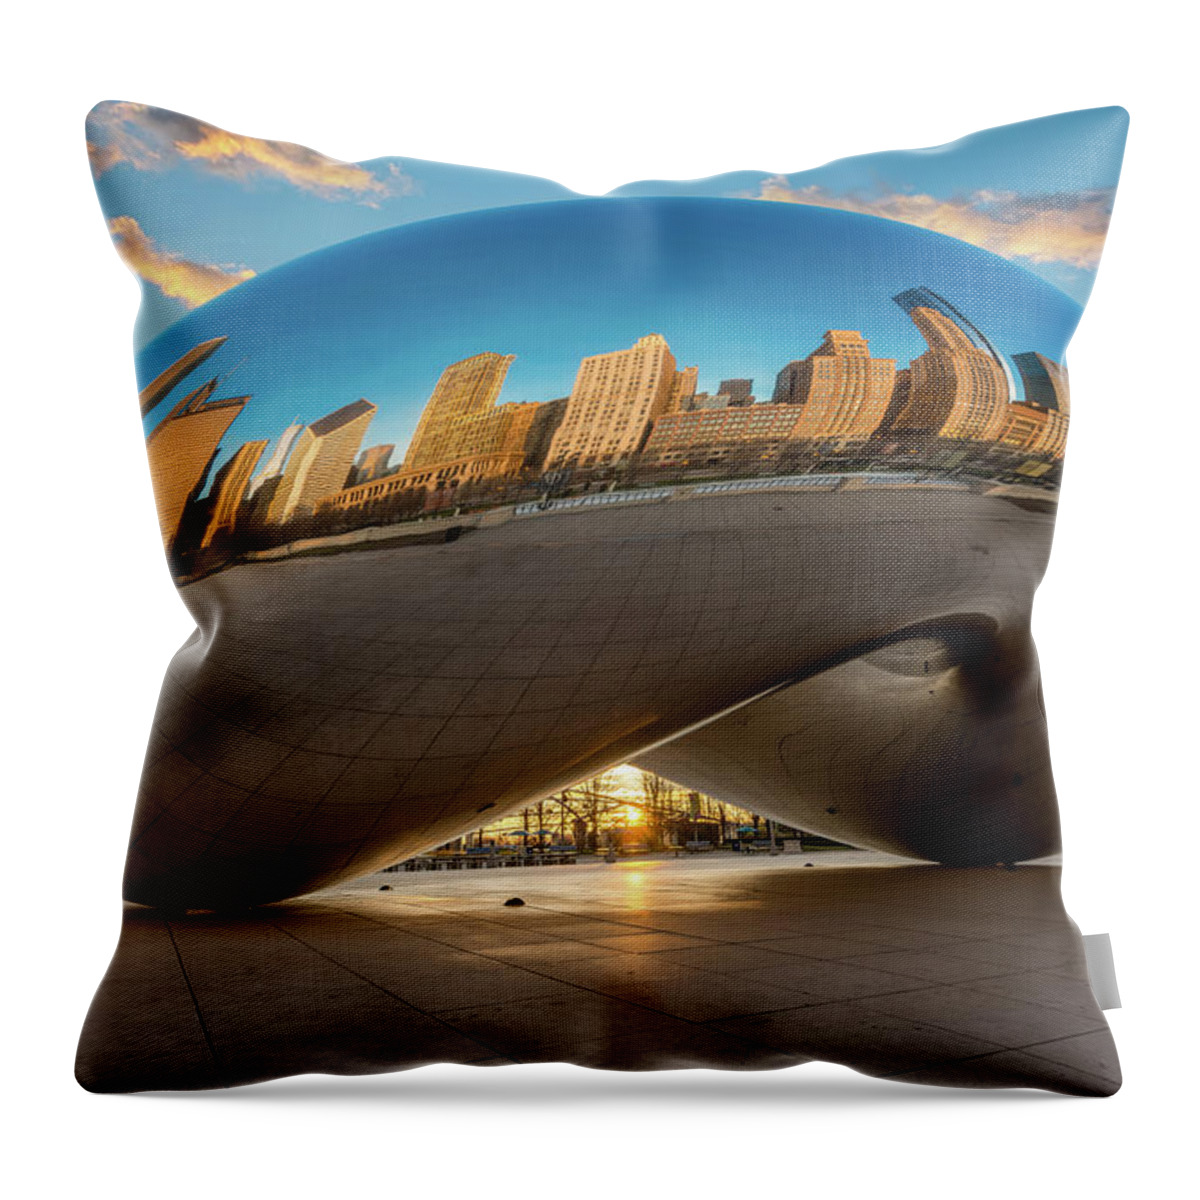 Chicago Cloud Gate Throw Pillow featuring the photograph Chicago Cloud Gate at Sunrise by Sebastian Musial